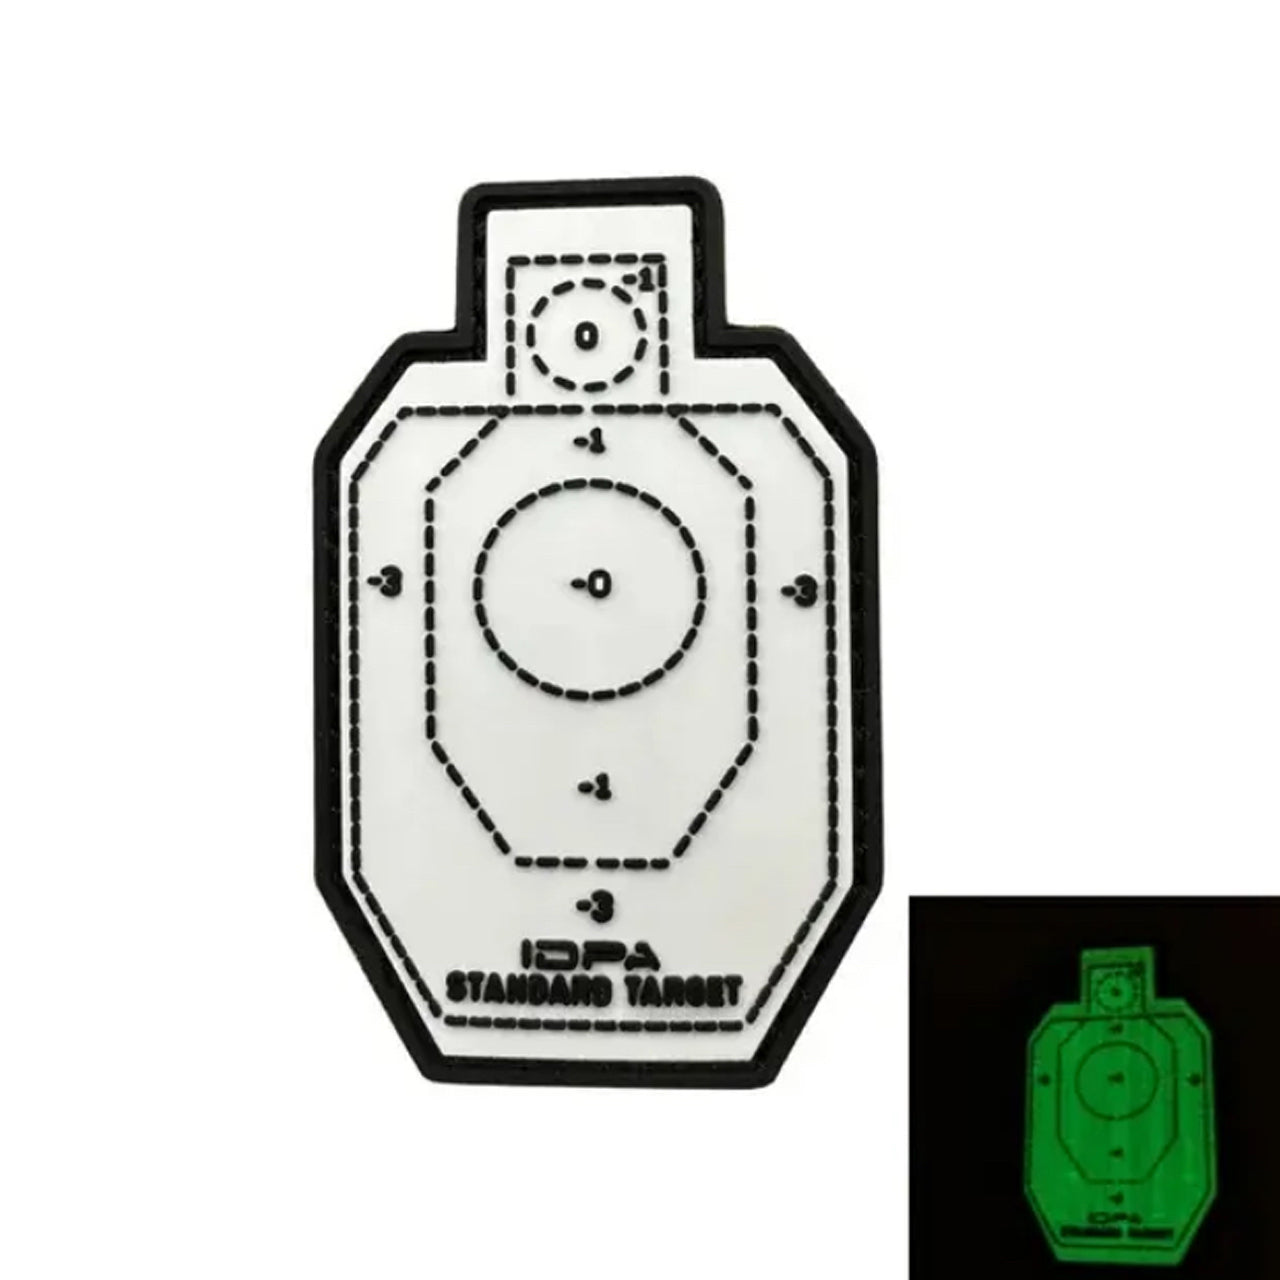 This perfectly sized Glow In The Dark Standard Target Embroidery Velcro Backed Morale Patch is an essential addition to any collection! At 7.5x5.5cm, this patch is ready to be proudly displayed on any item of clothing. Show off your passion and style with this expertly embroidered design. www.defenceqstore.com.au